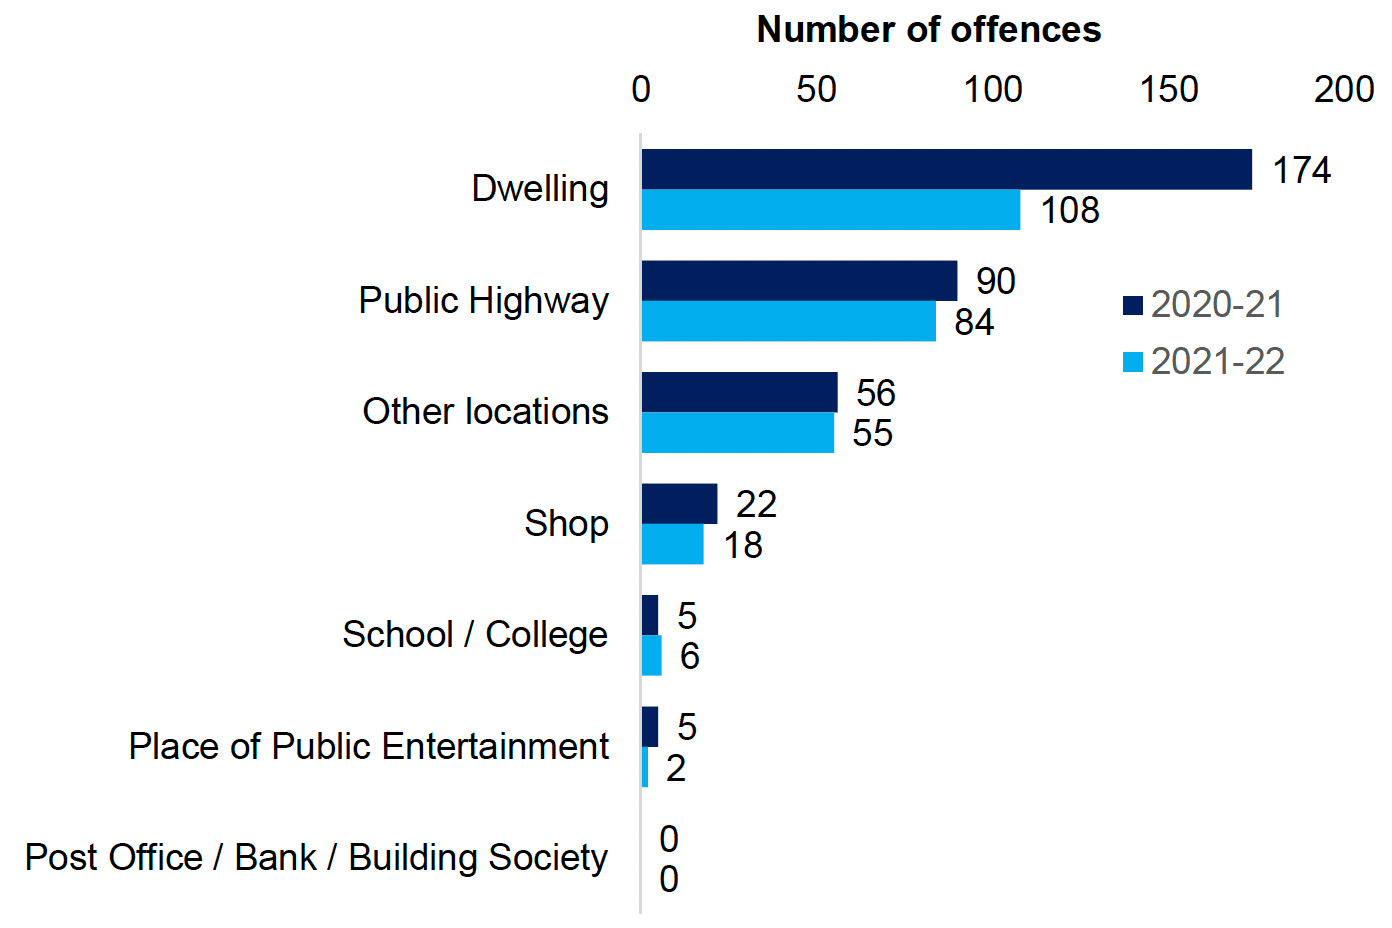 A bar chart showing that mist offences took place in a dwelling in both 2020-21 and 2021-22, followed by public highway. There were no offences that took place in a post office, bank or building society in either year.